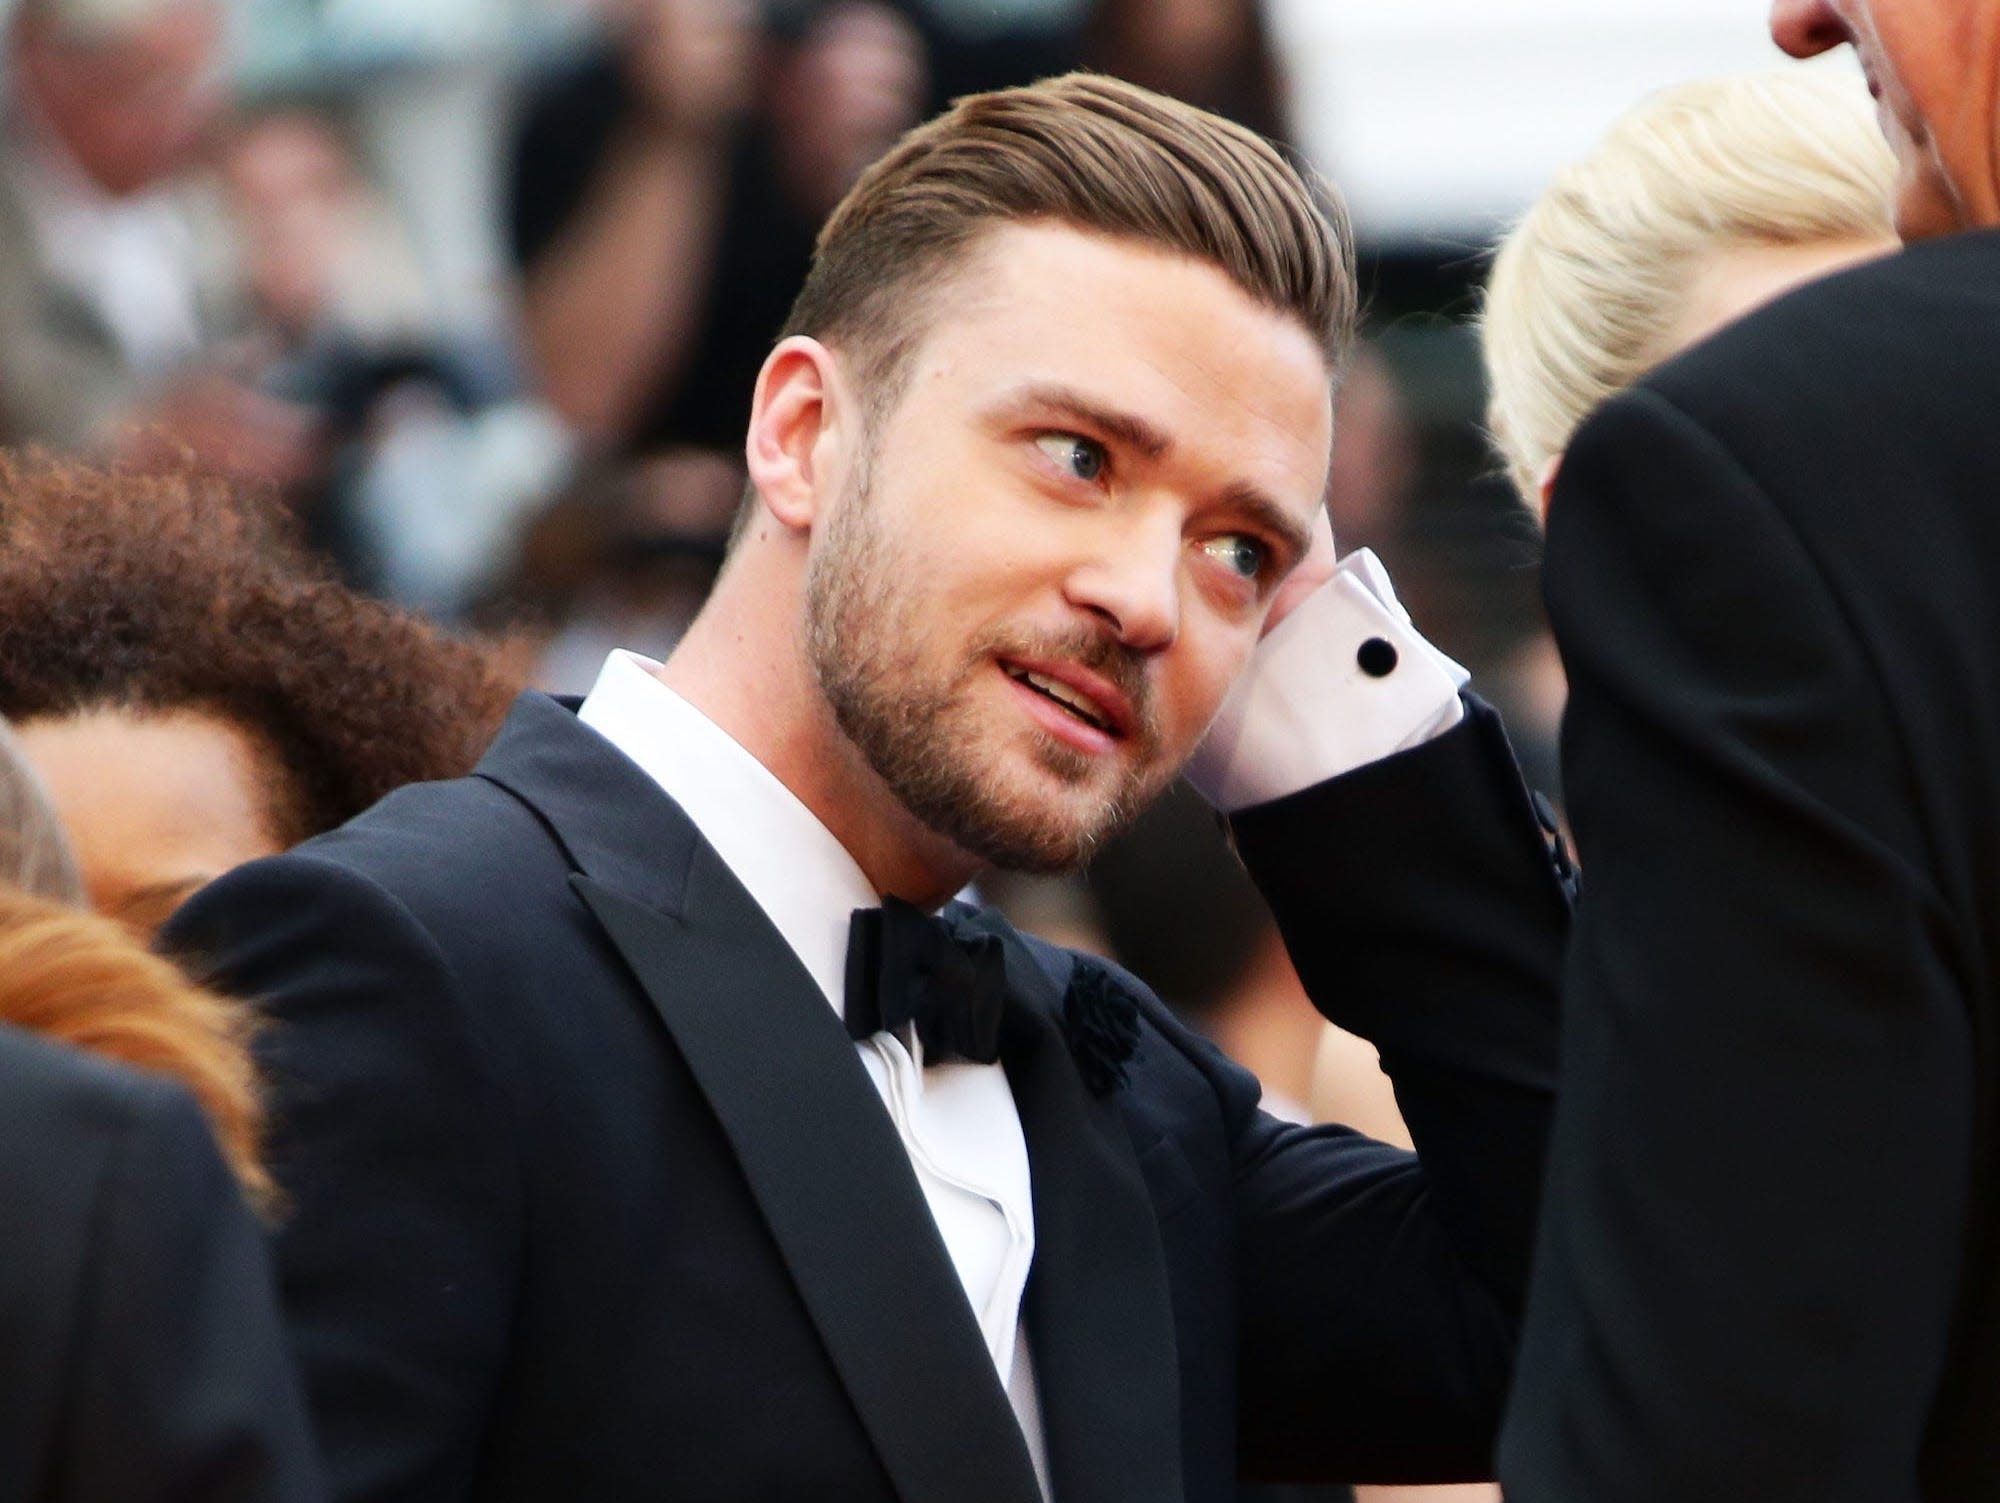 A journalist asked Justin Timberlake to apologize to Janet Jackson 5 years ago, and the singer dismissed him with a tweet that said 'bye'